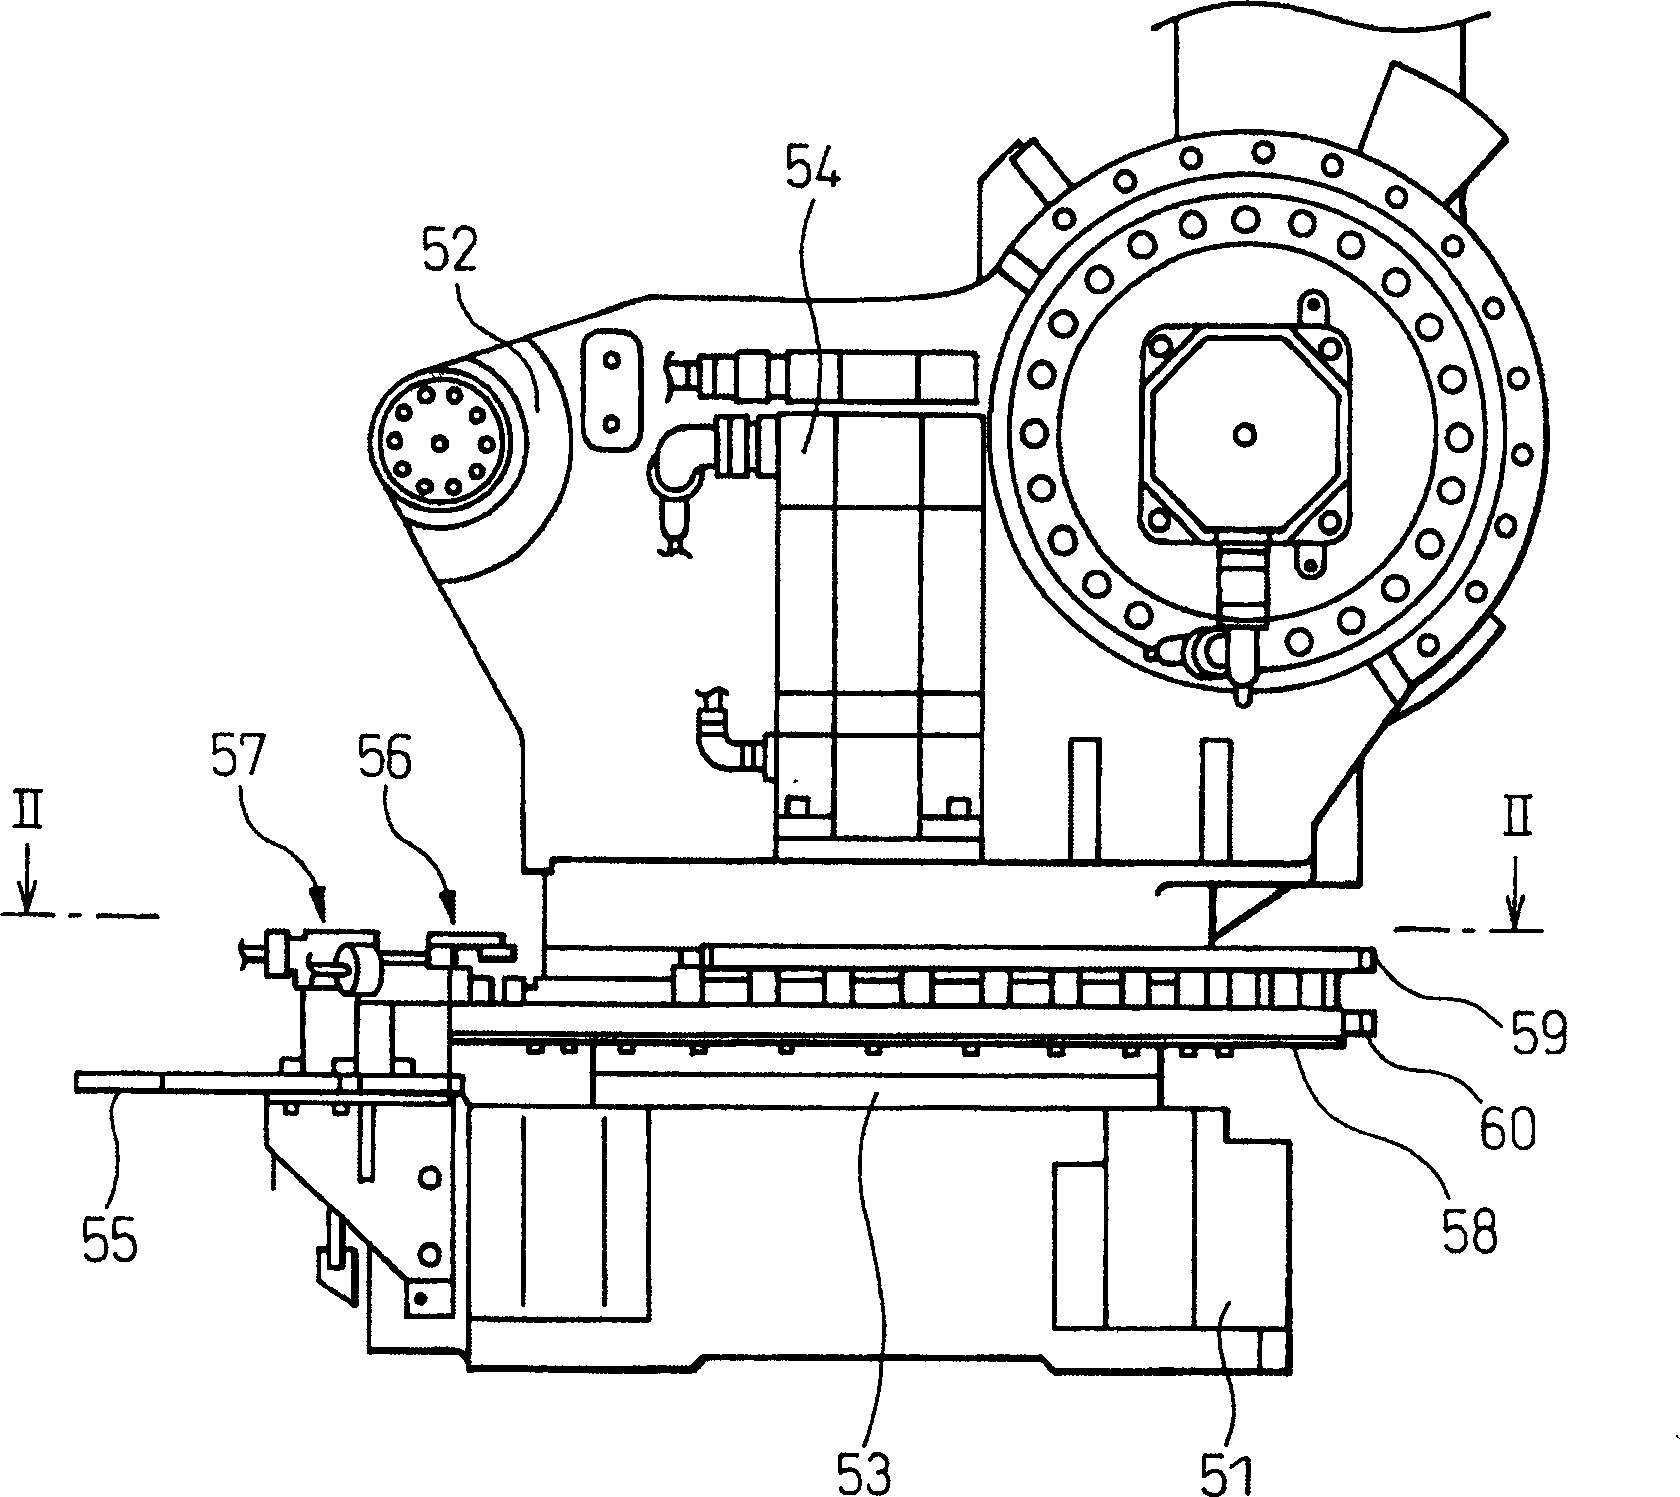 Robot knuckle actuating range limitation device for equipping movement area checking device